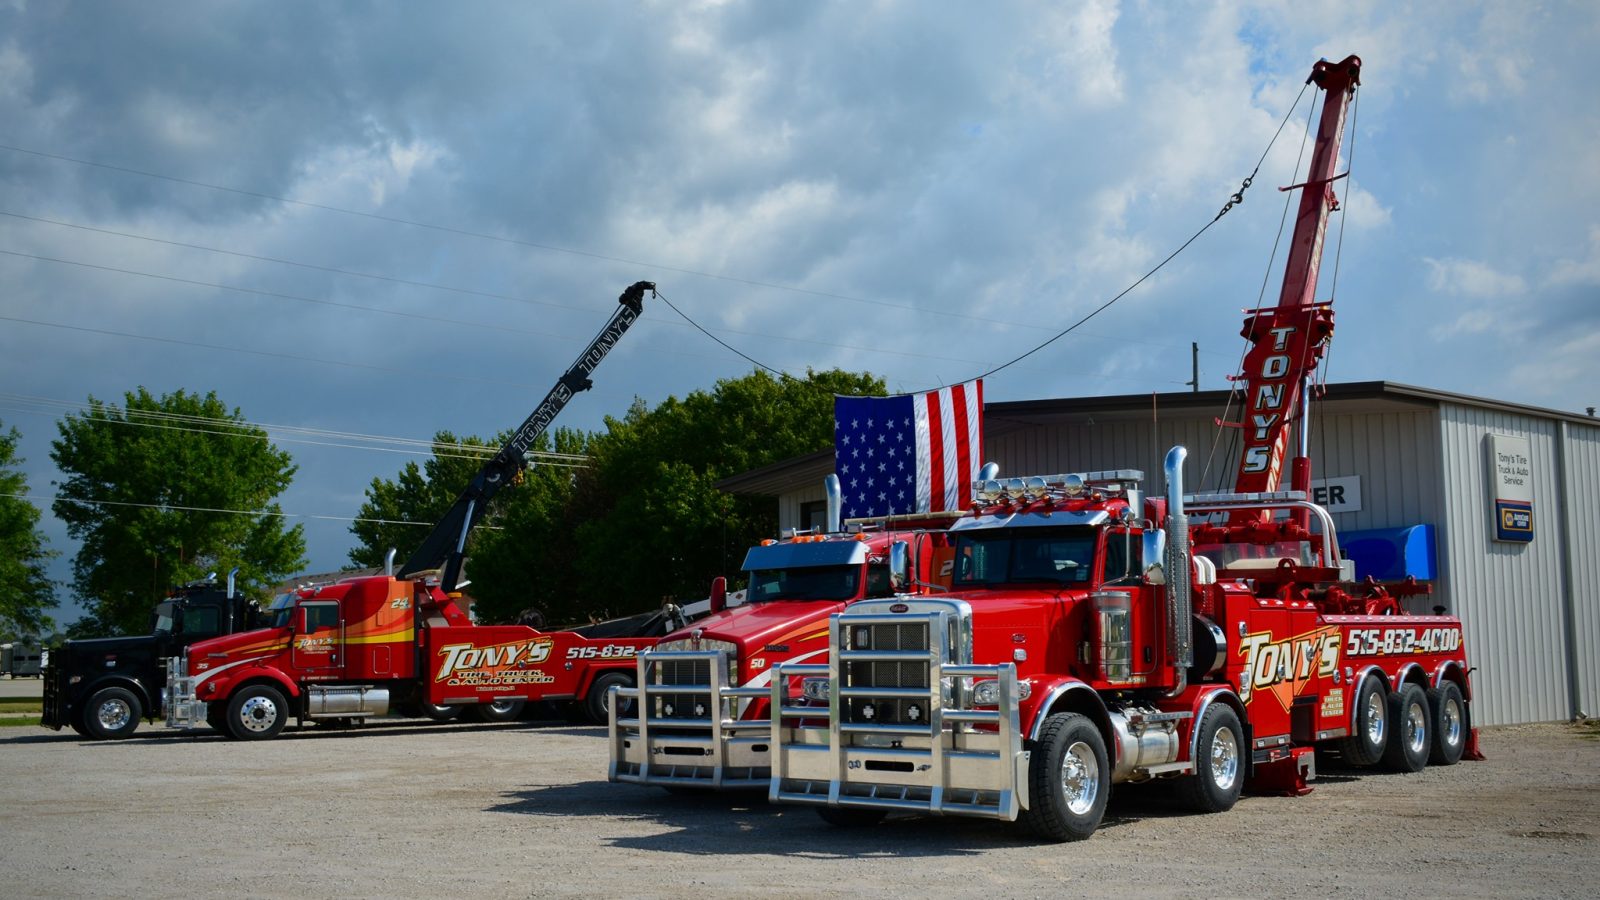 Tony's Tire, Truck & Towing fleet at Webster City location in Iowa.